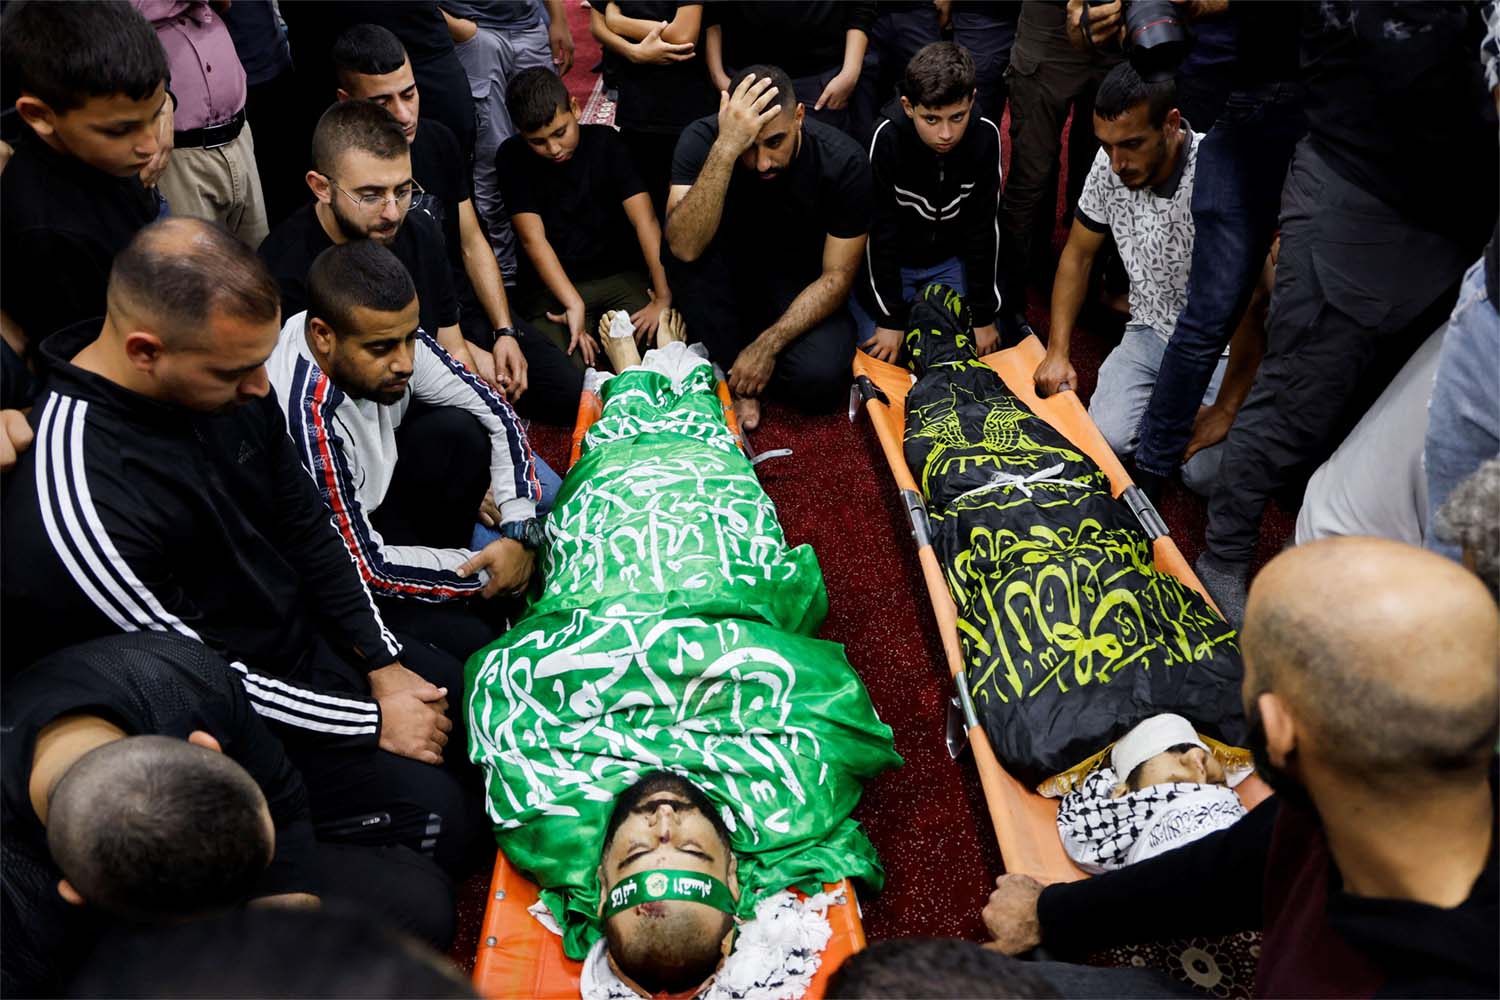 People attend a funeral for 3 Palestinians who were killed when Israeli forces raided Jenin refugee camp